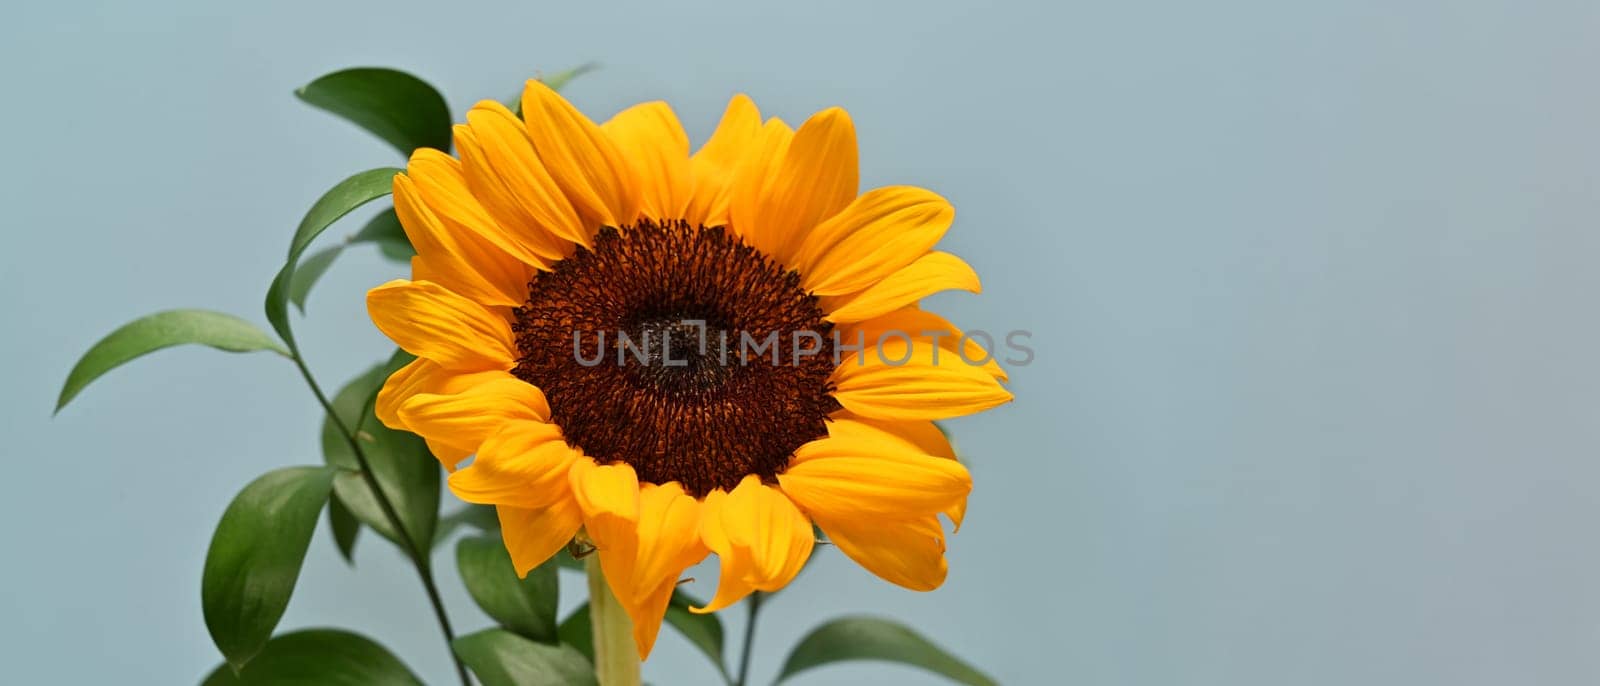 Beautiful sunflowers on light blue background. Floral background, copy space for your text.